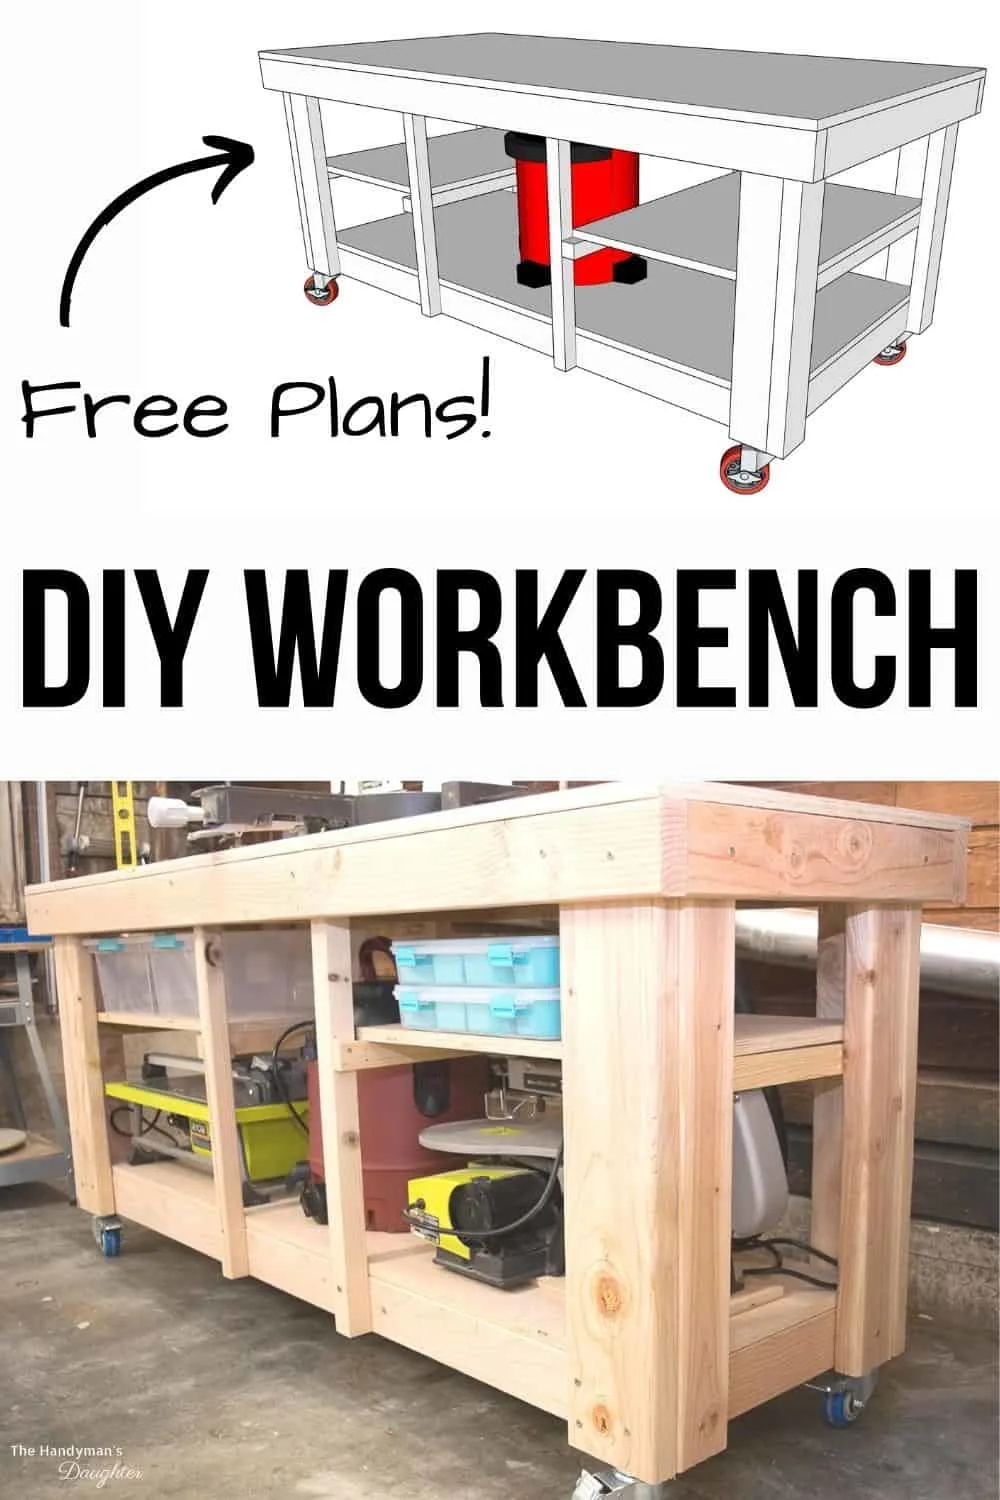 2x4 Projects - 11 Incredible Things You Can Build Using Only 2 x 4s